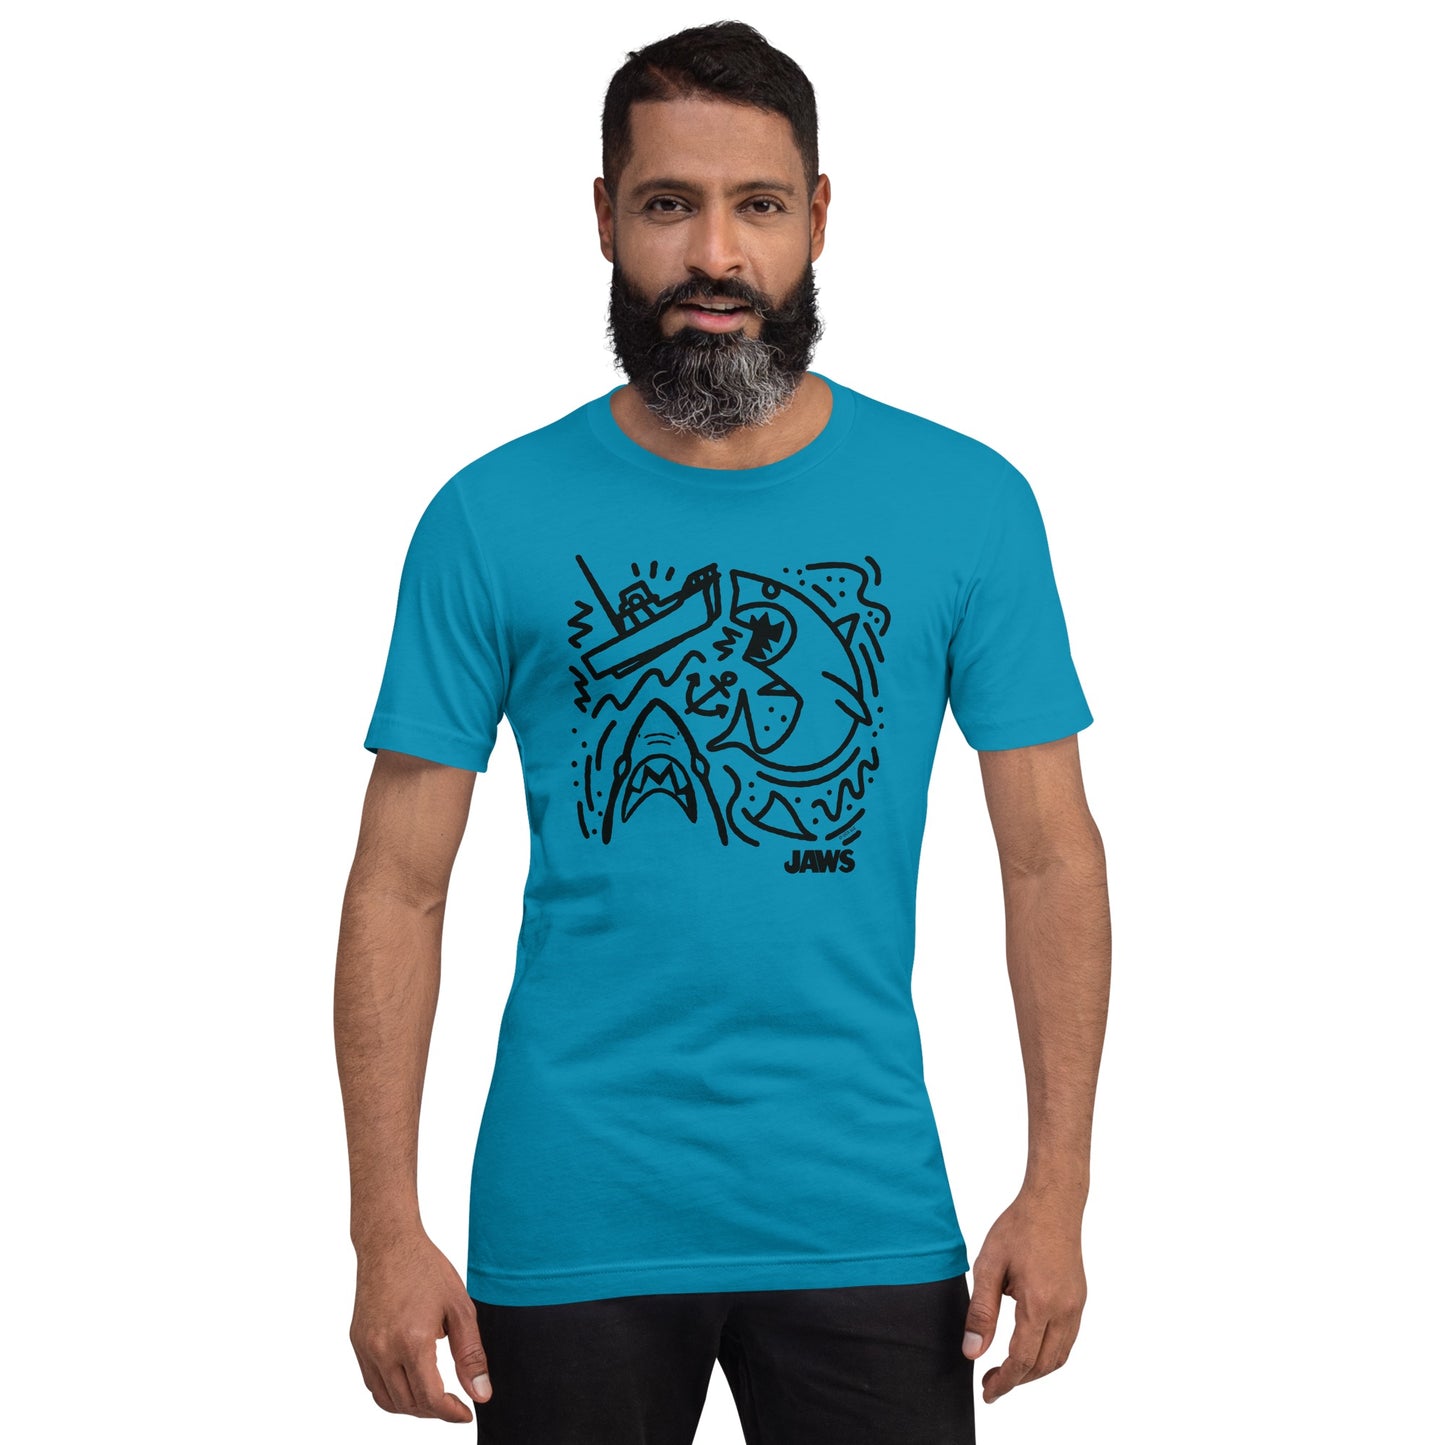 Jaws Boat Doodle T-Shirt